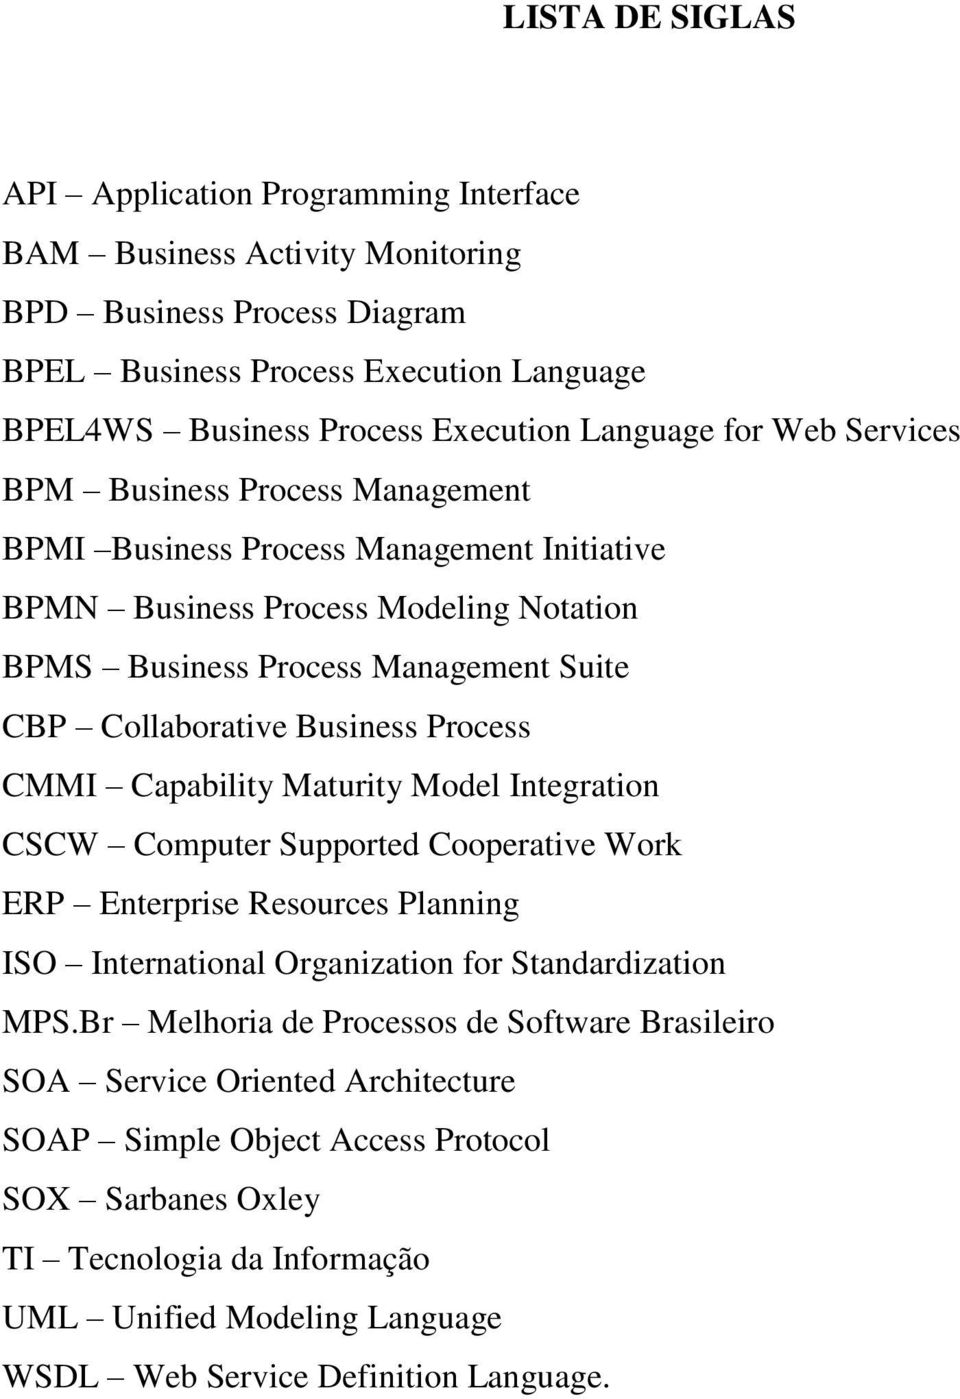 Business Process CMMI Capability Maturity Model Integration CSCW Computer Supported Cooperative Work ERP Enterprise Resources Planning ISO International Organization for Standardization MPS.